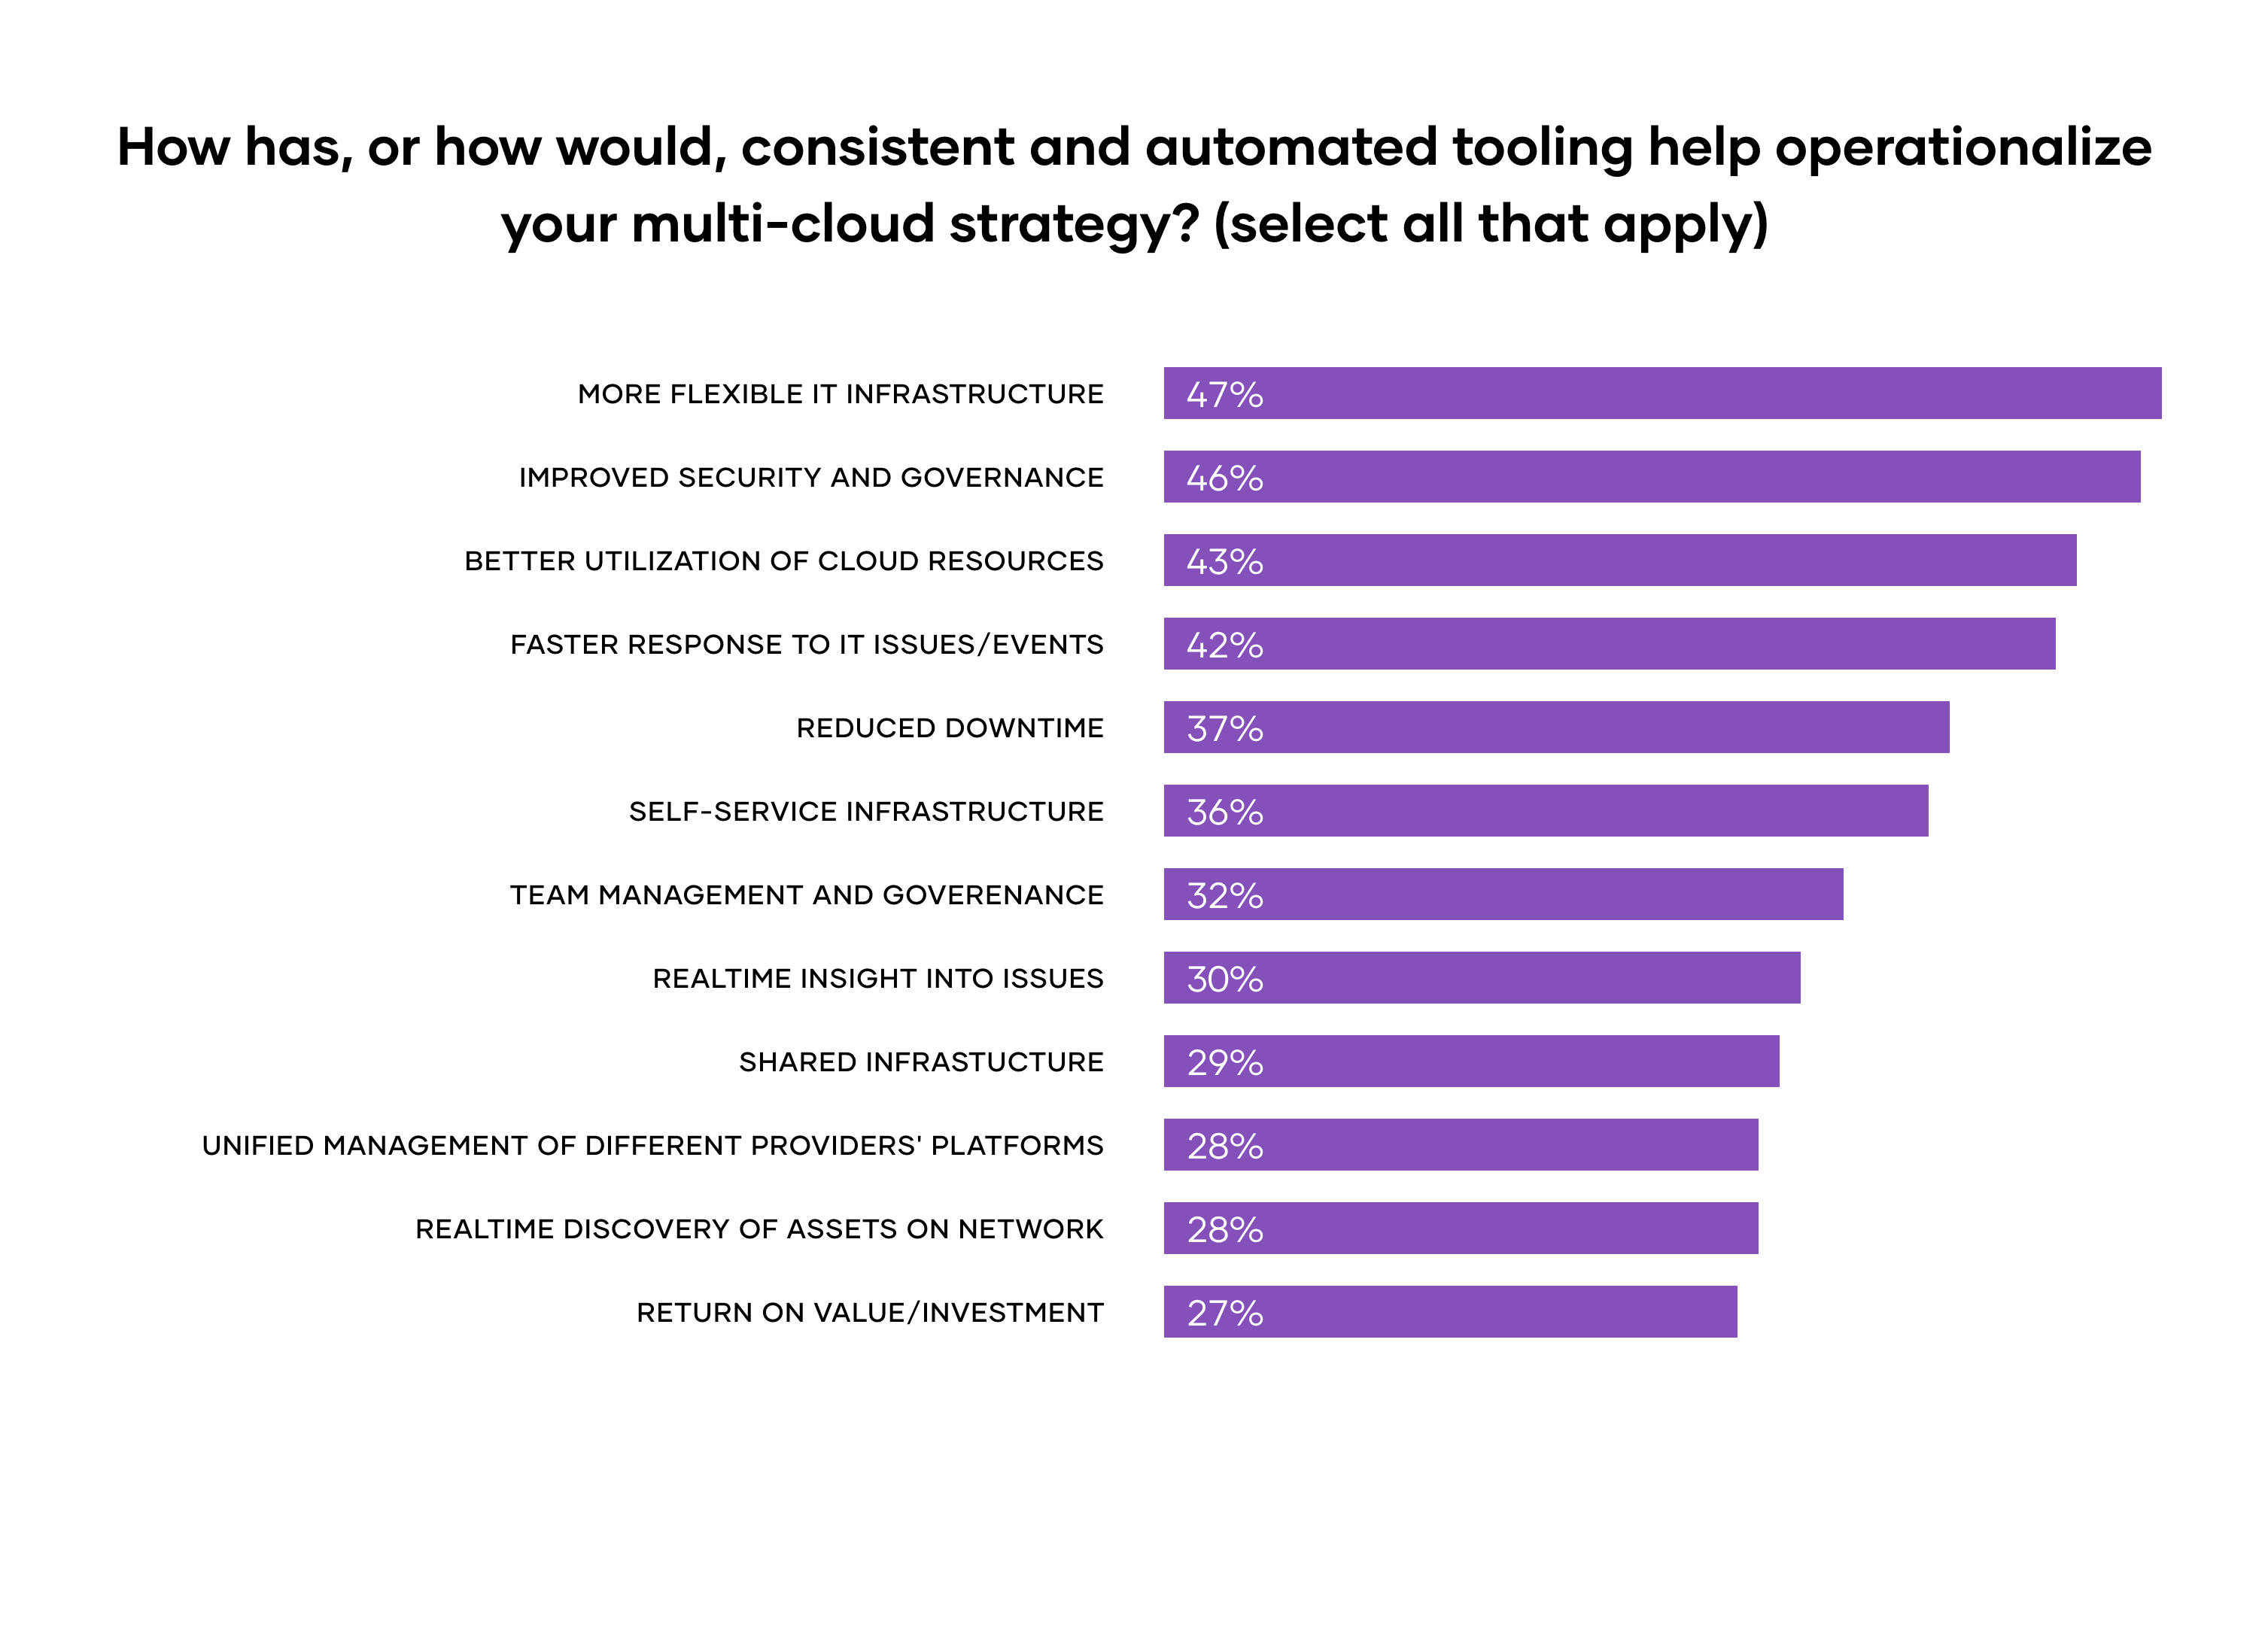 How has, or how would, consistent and automated tooling help operationalize your multi-cloud strategy?